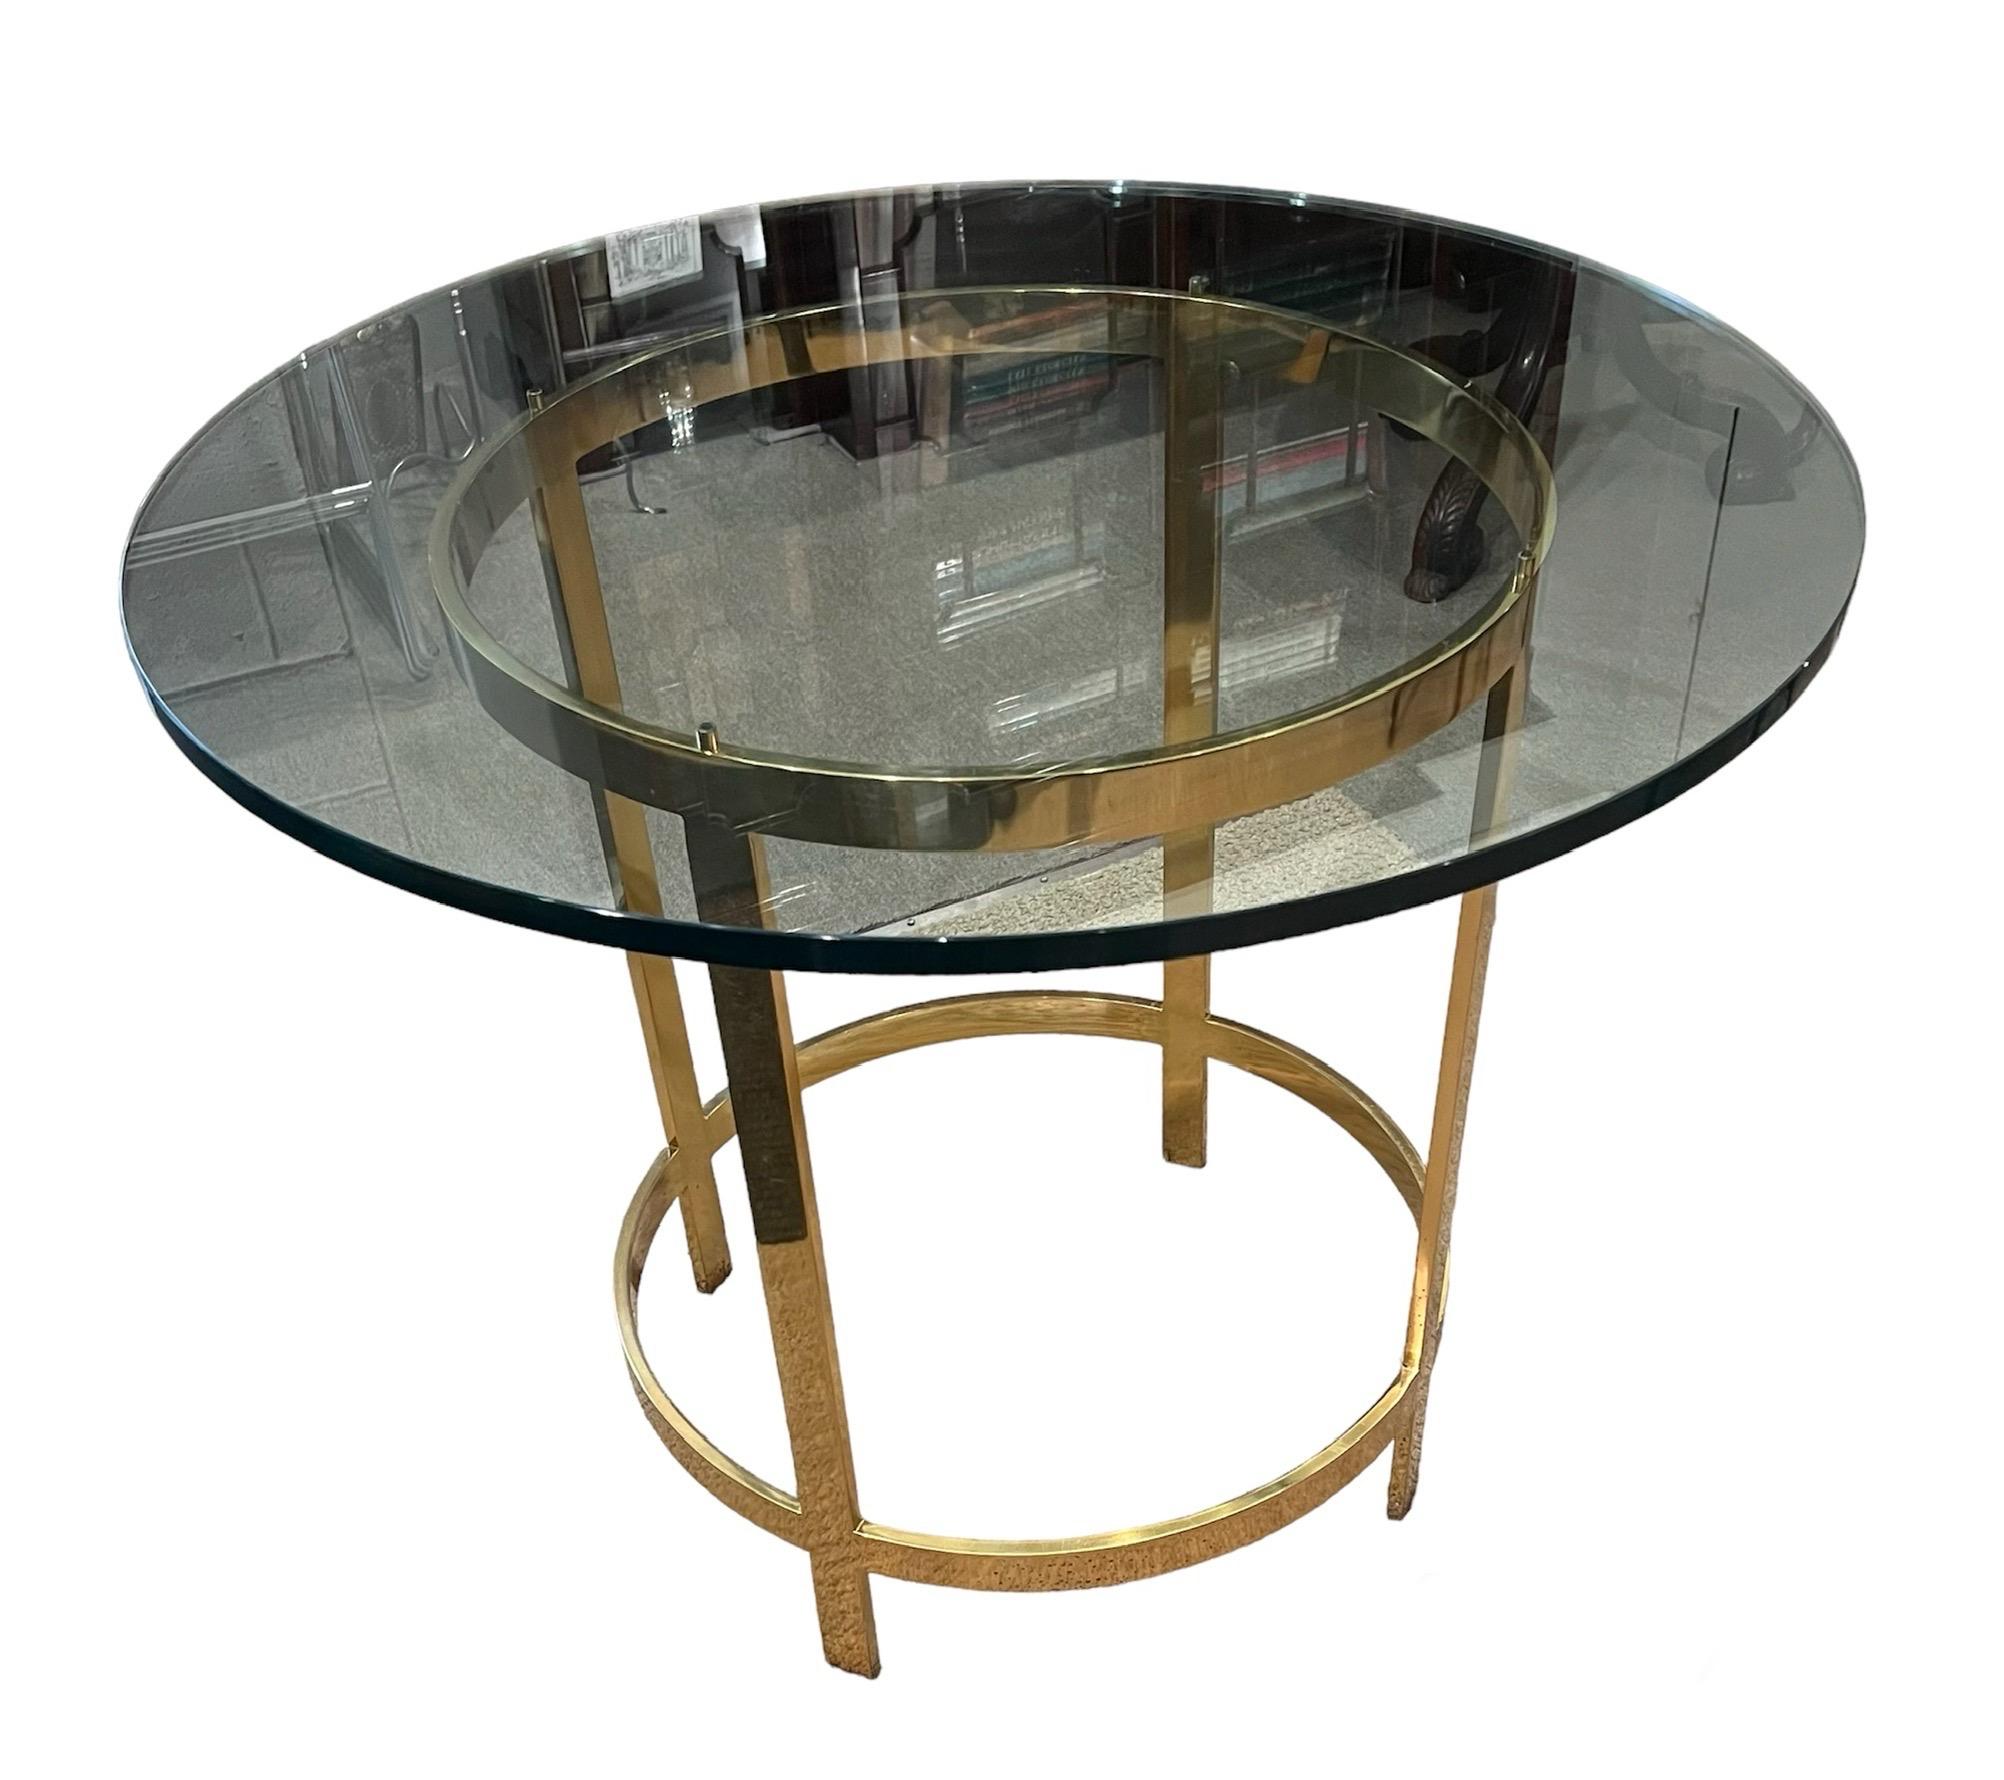 Solid Bronze Glass Top Center Table with clear 
Glass top & loose vinyl top. Solid polished & sealed bronze base. 
Base width 24”base height 28.25” overall height 29”
Overall width 36” 